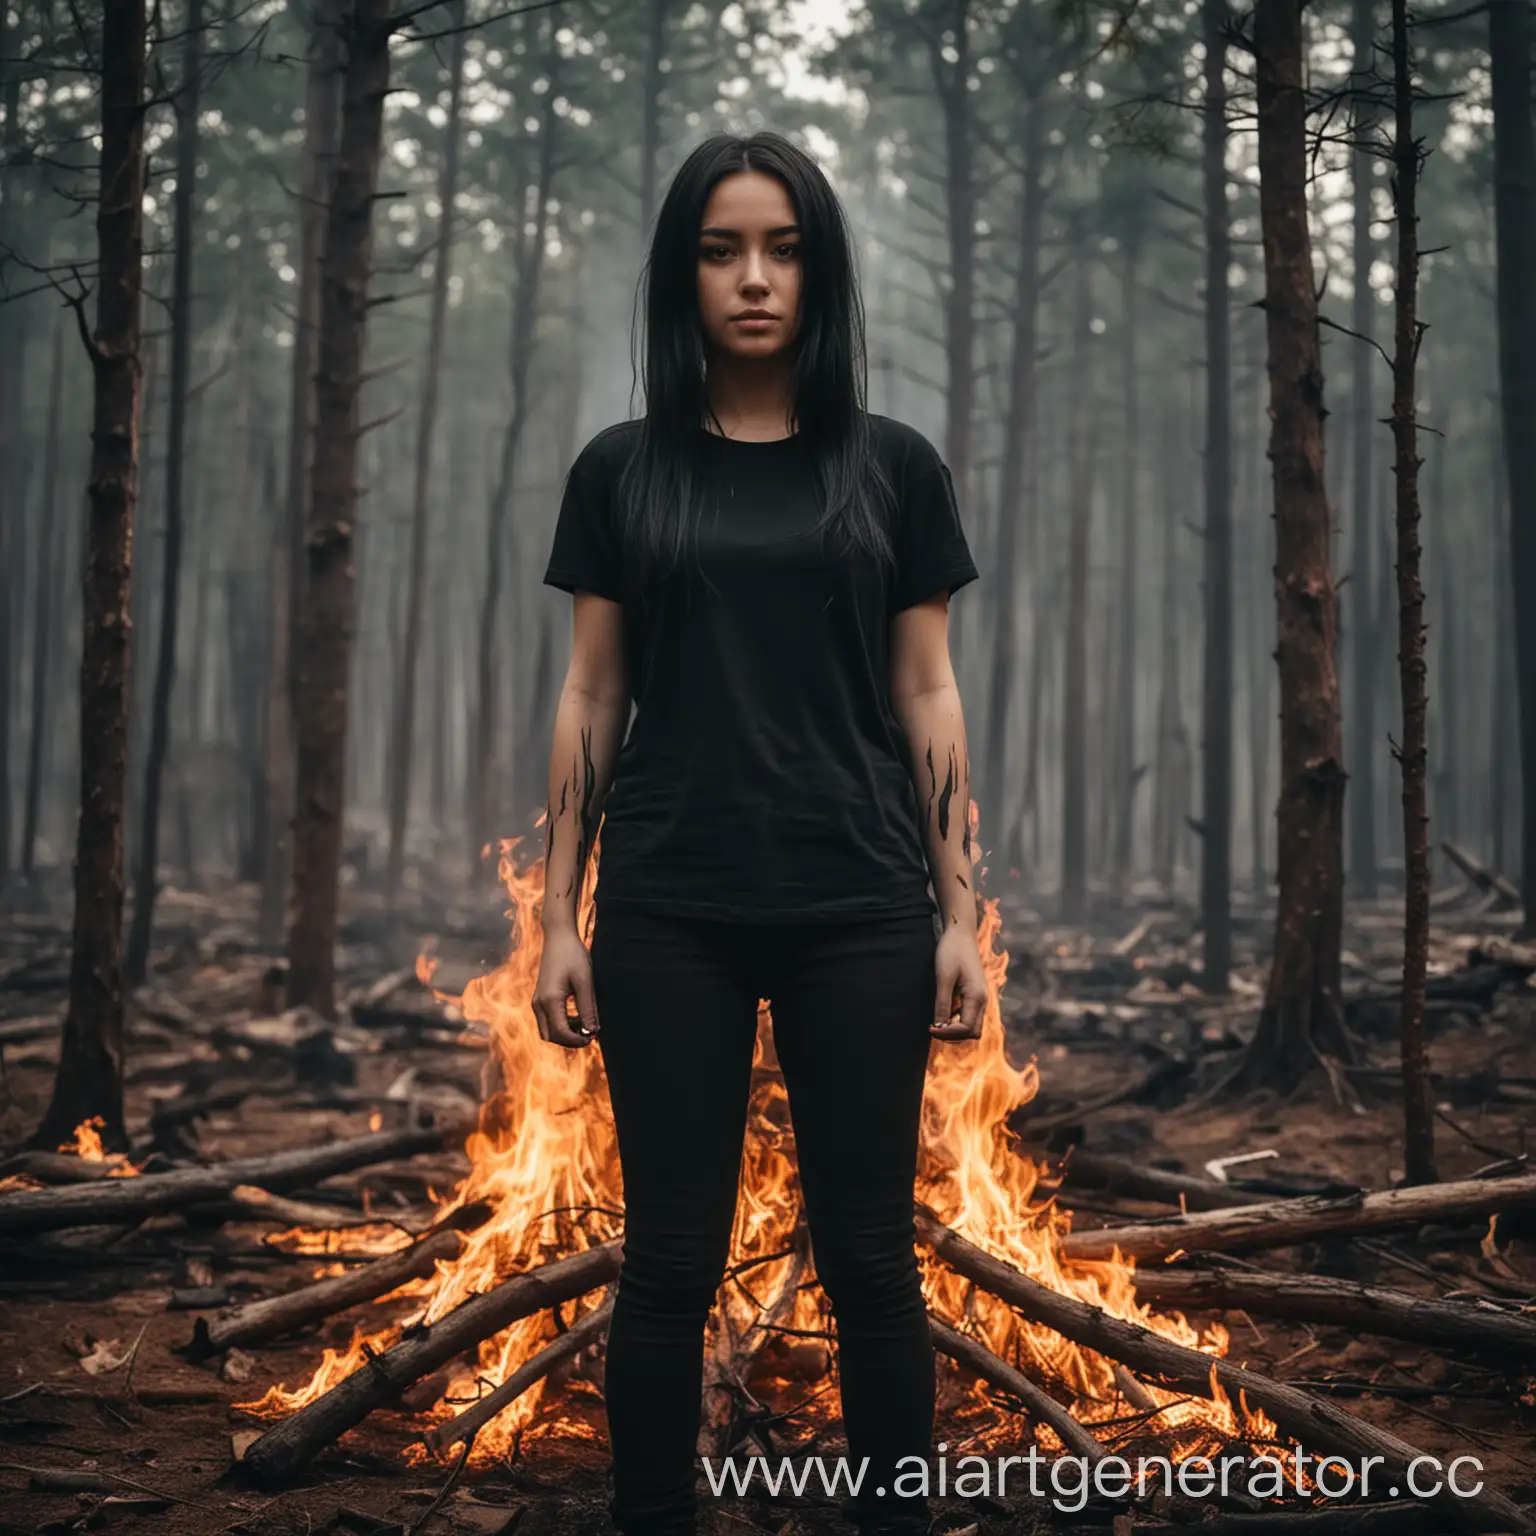 Burning forest. Before it near us stands a girl with black shirt hair with lighter in hand